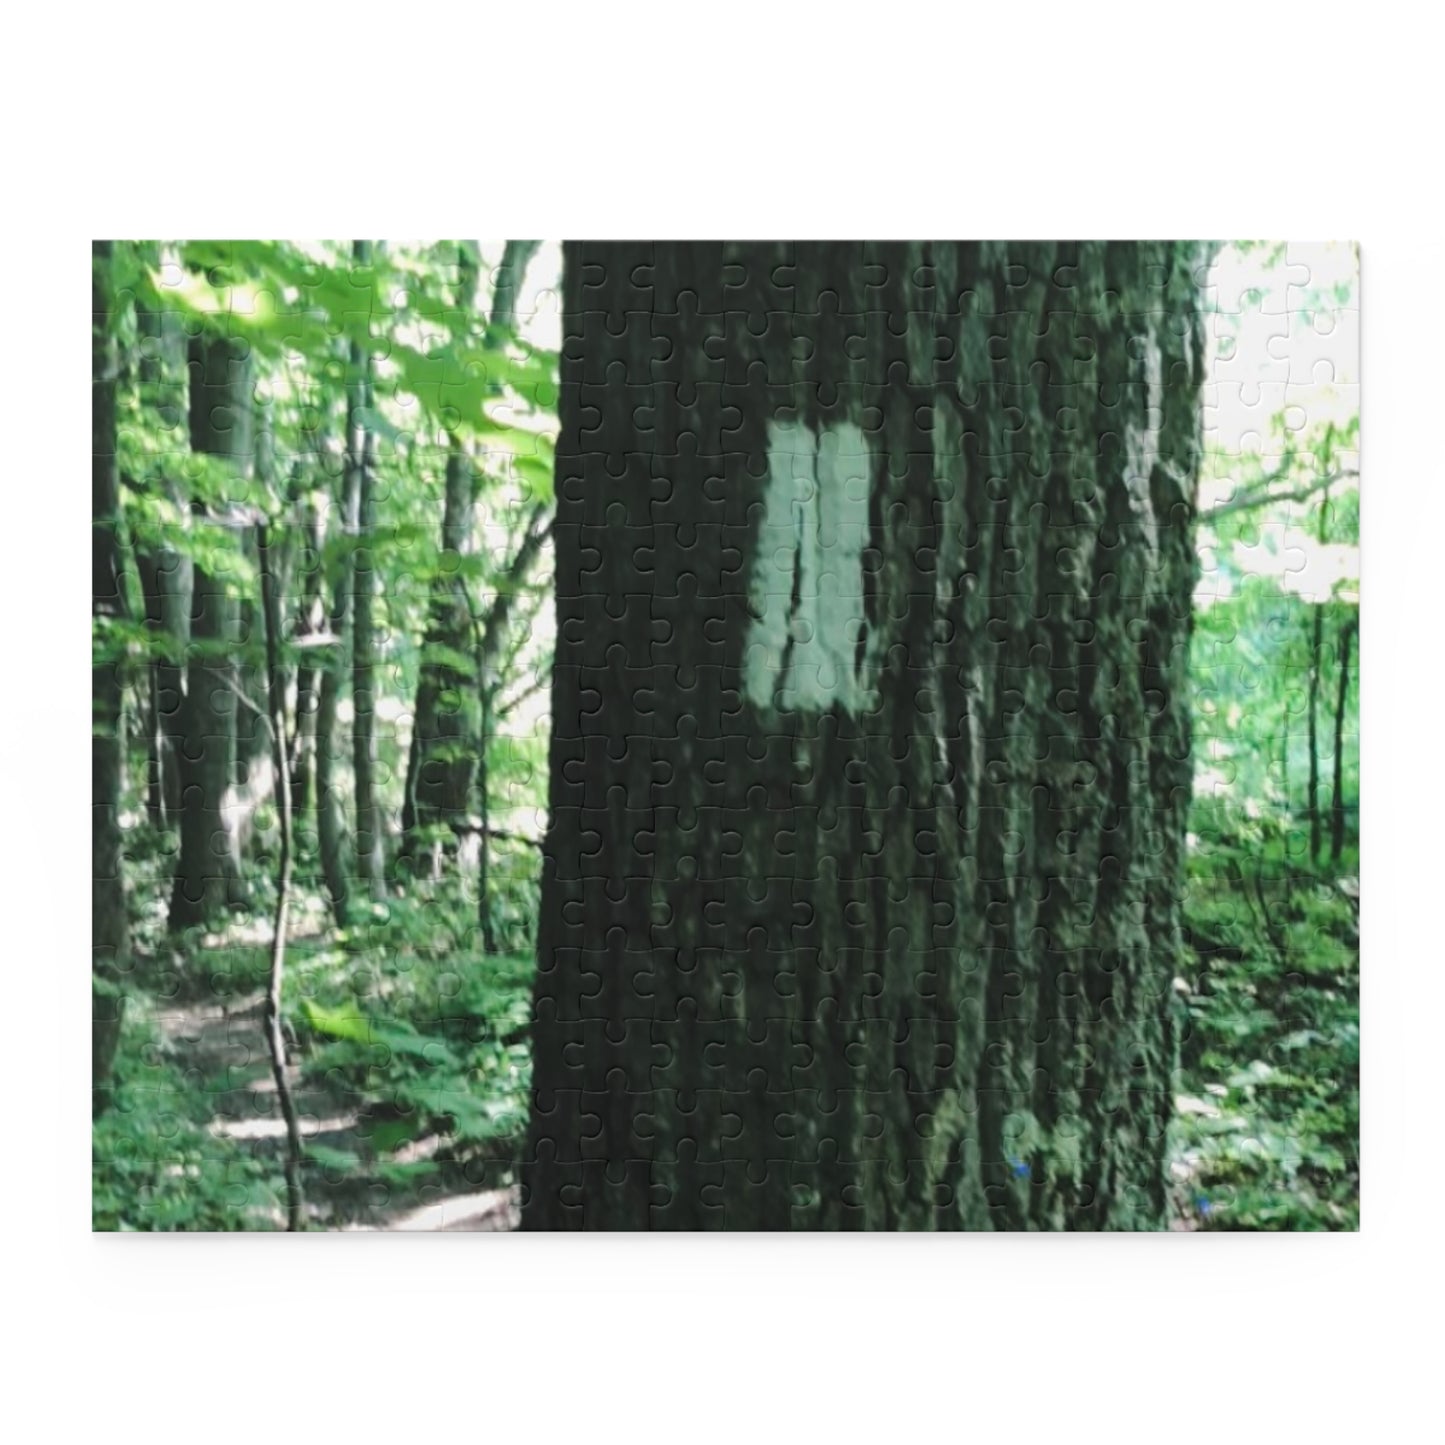 Appalachian Trail Puzzle, Gift for hikers, gift for Appalachian hikers, Appalachian Trail Puzzle